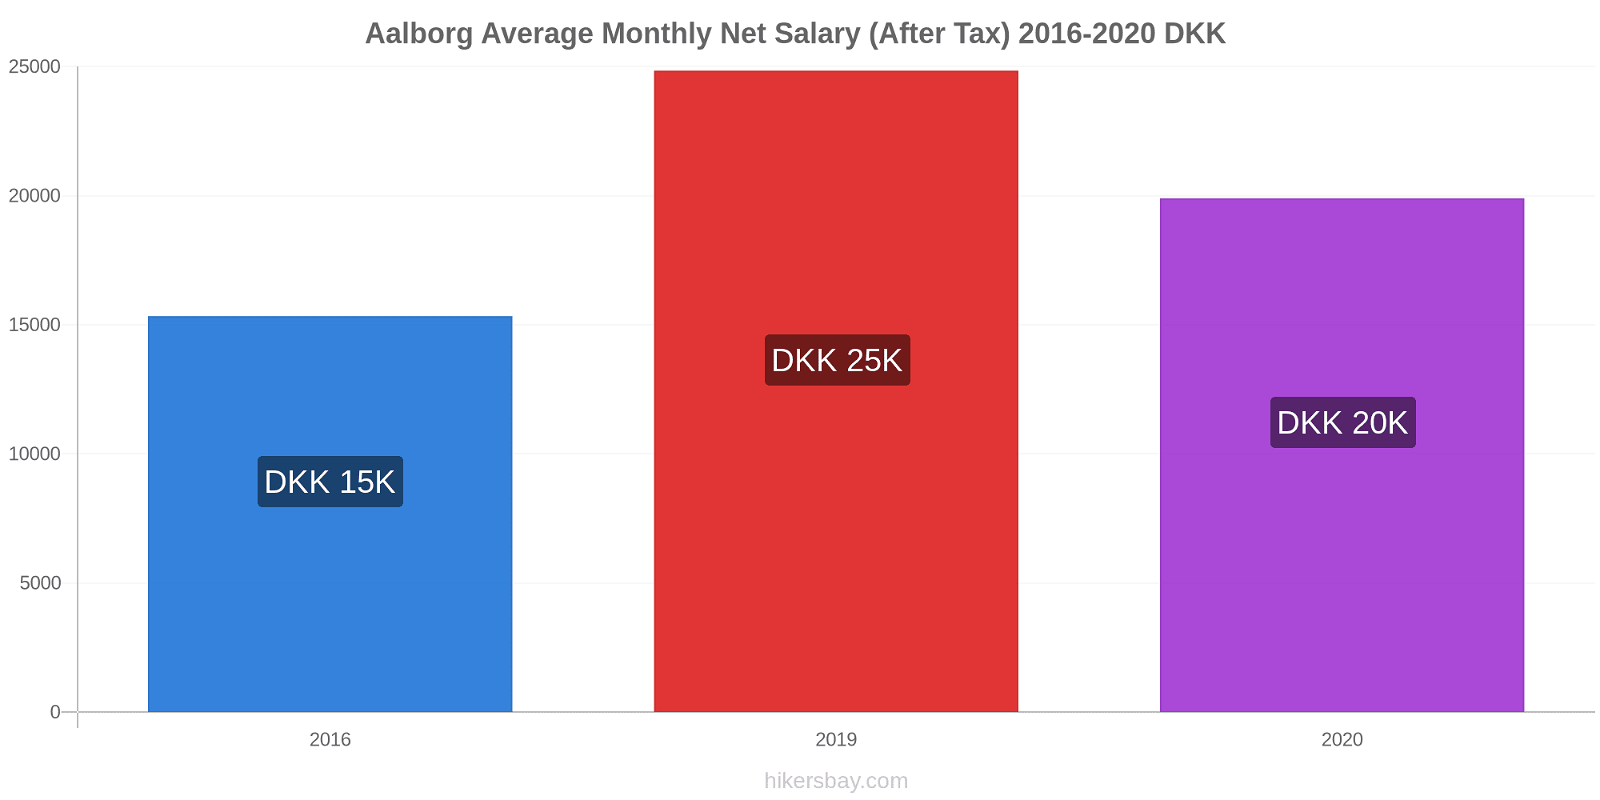 Aalborg price changes Average Monthly Net Salary (After Tax) hikersbay.com